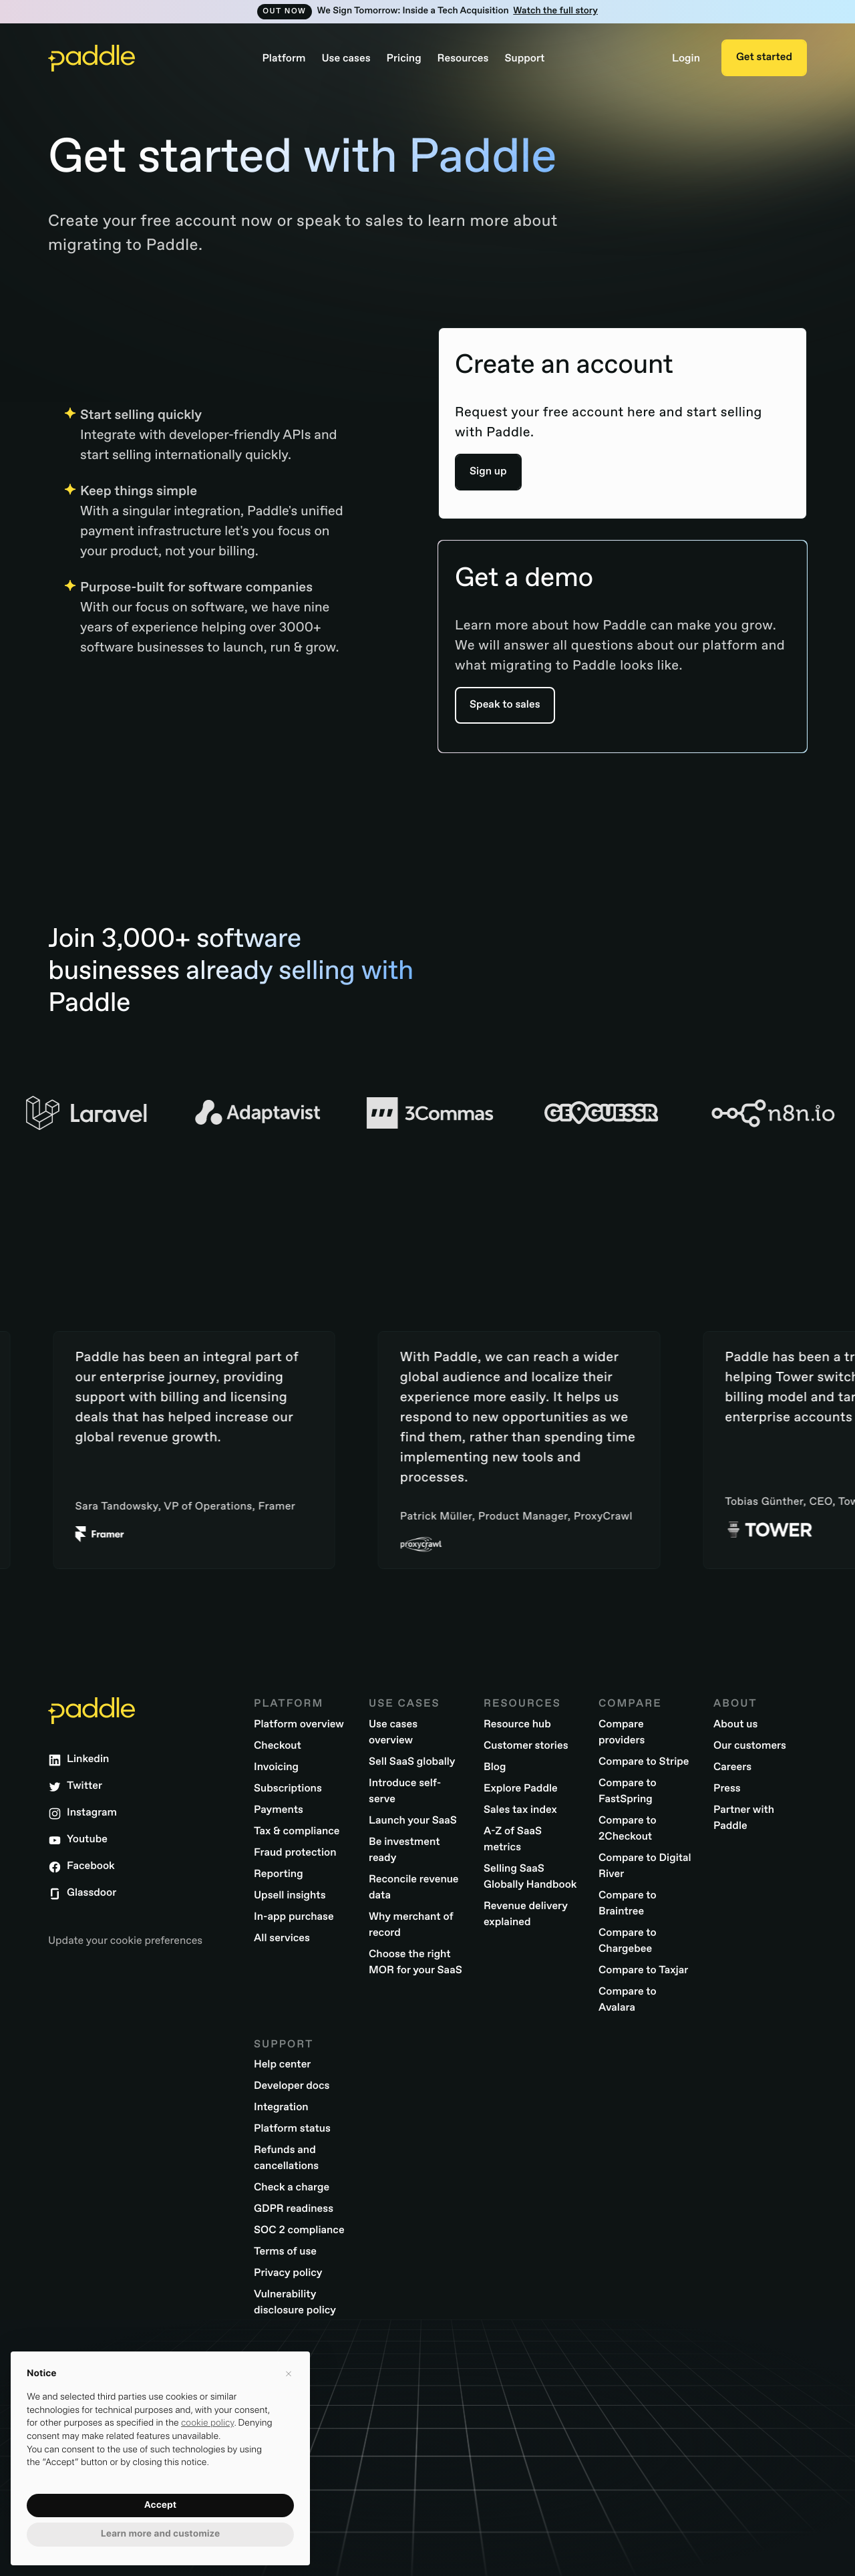 sign up page example of Get started with Paddle